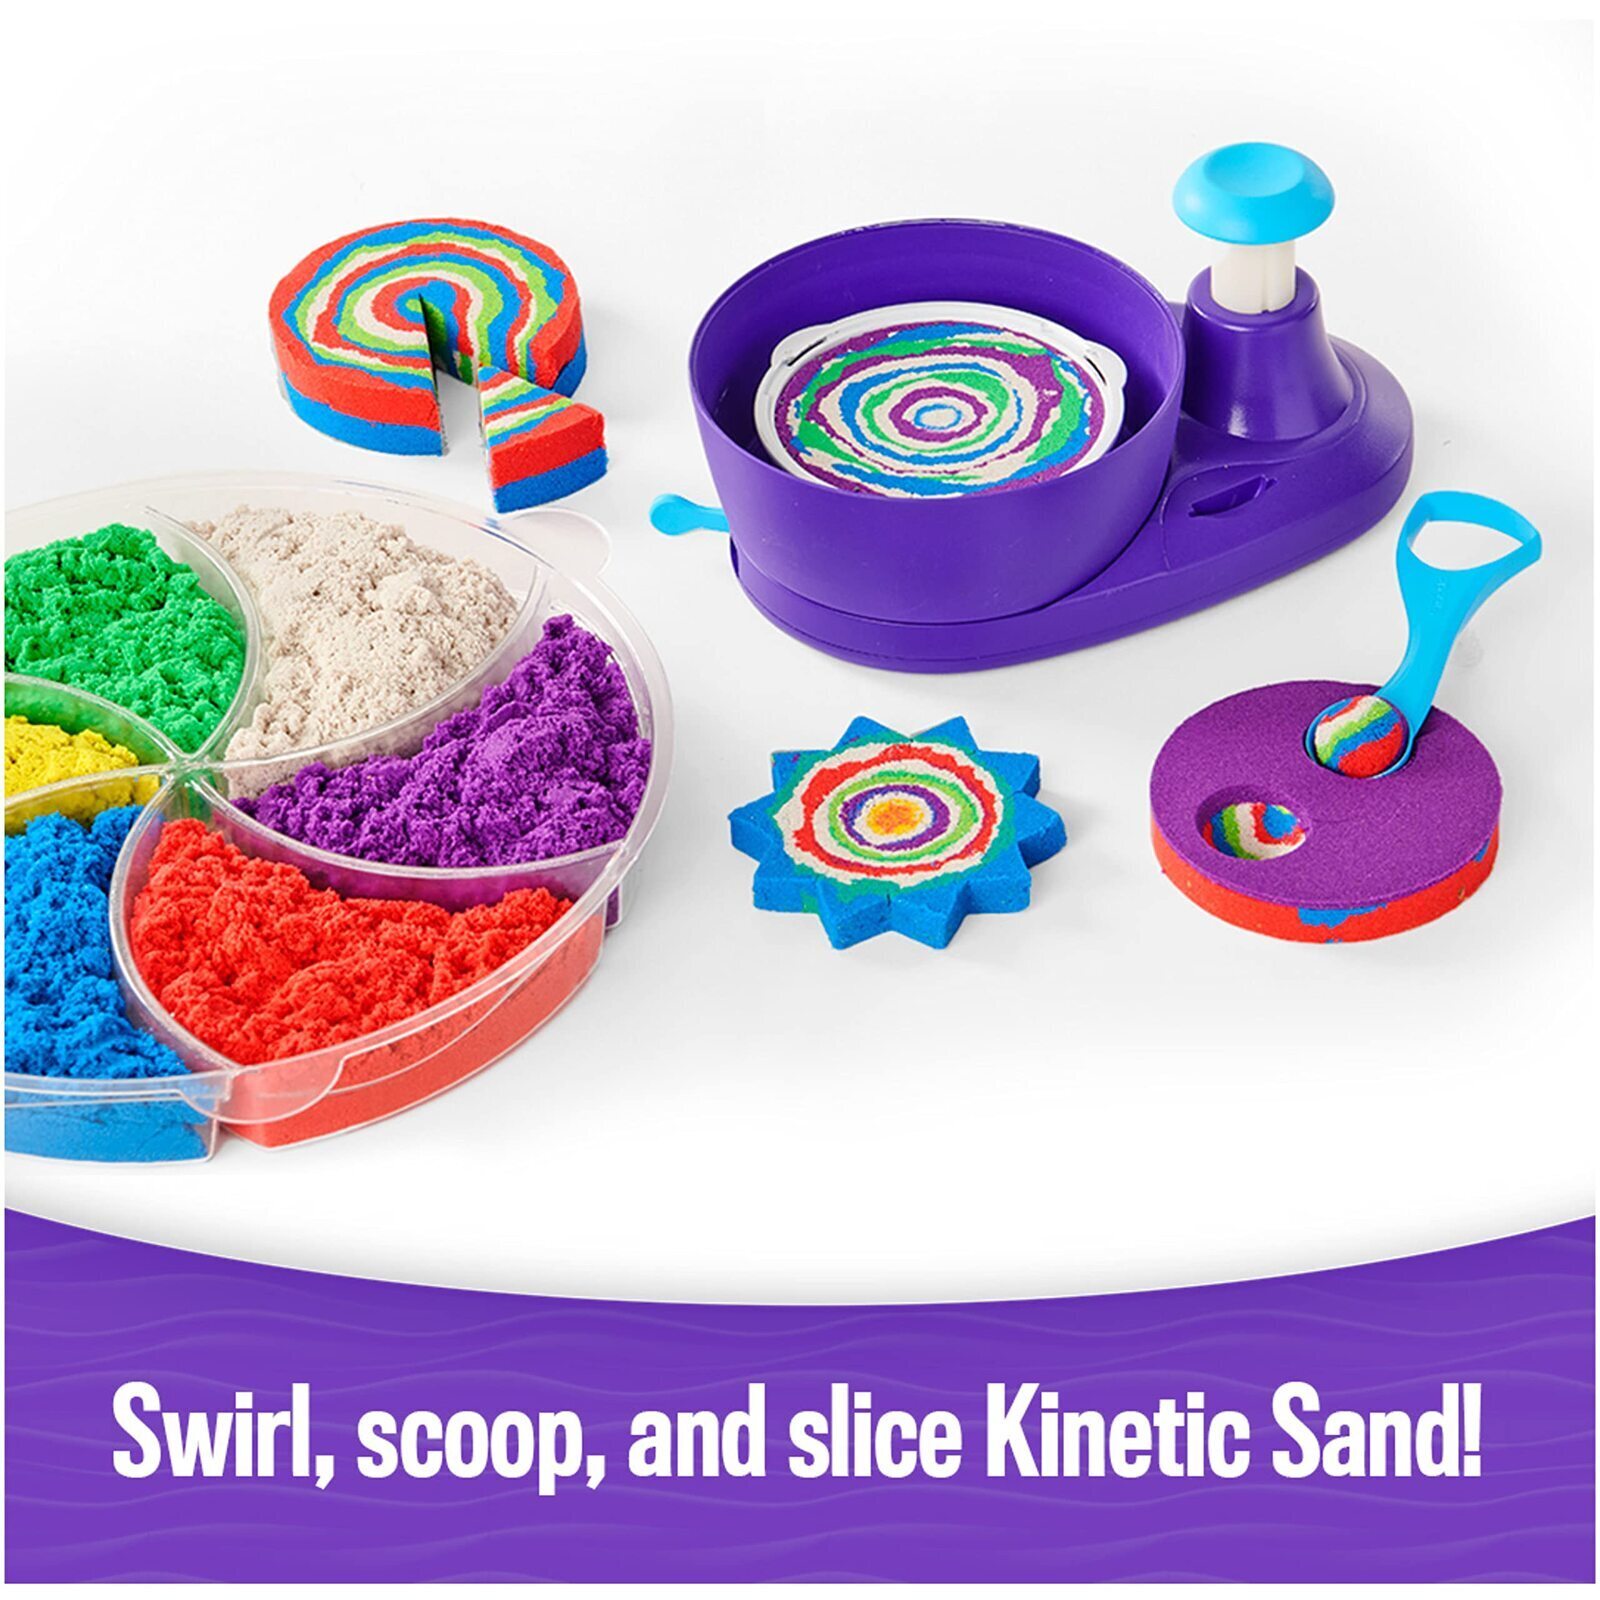 Kinetic Sand Swirl N Surprise Sand Kit English Version by SPIN